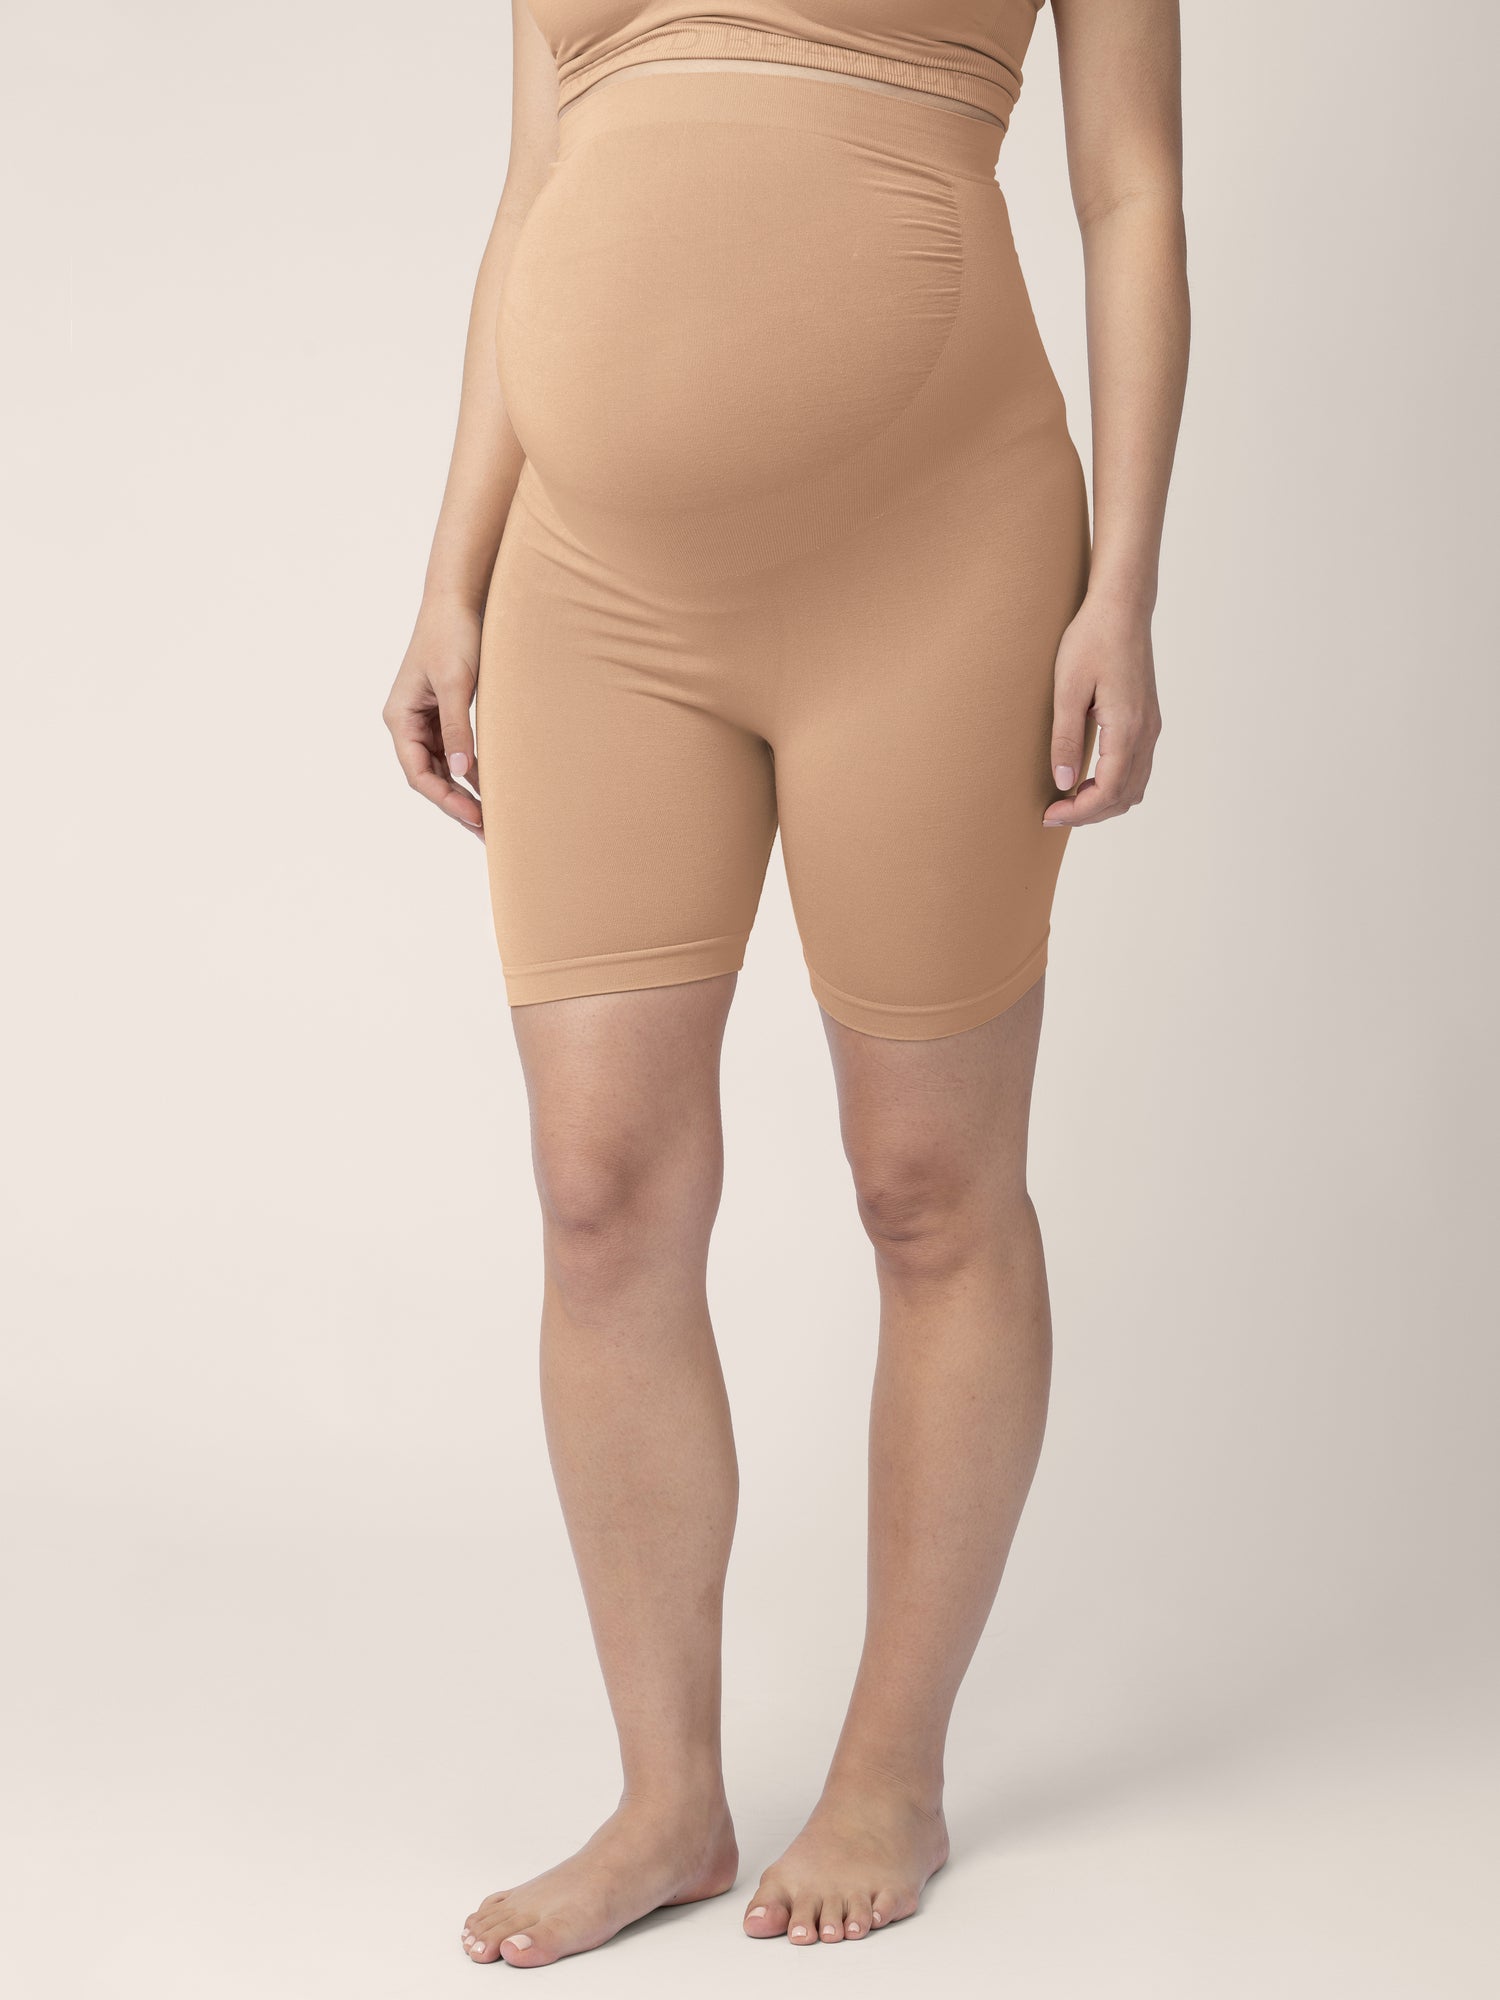 Bottom half of a pregnant model wearing the Seamless Bamboo Maternity Thigh Savers